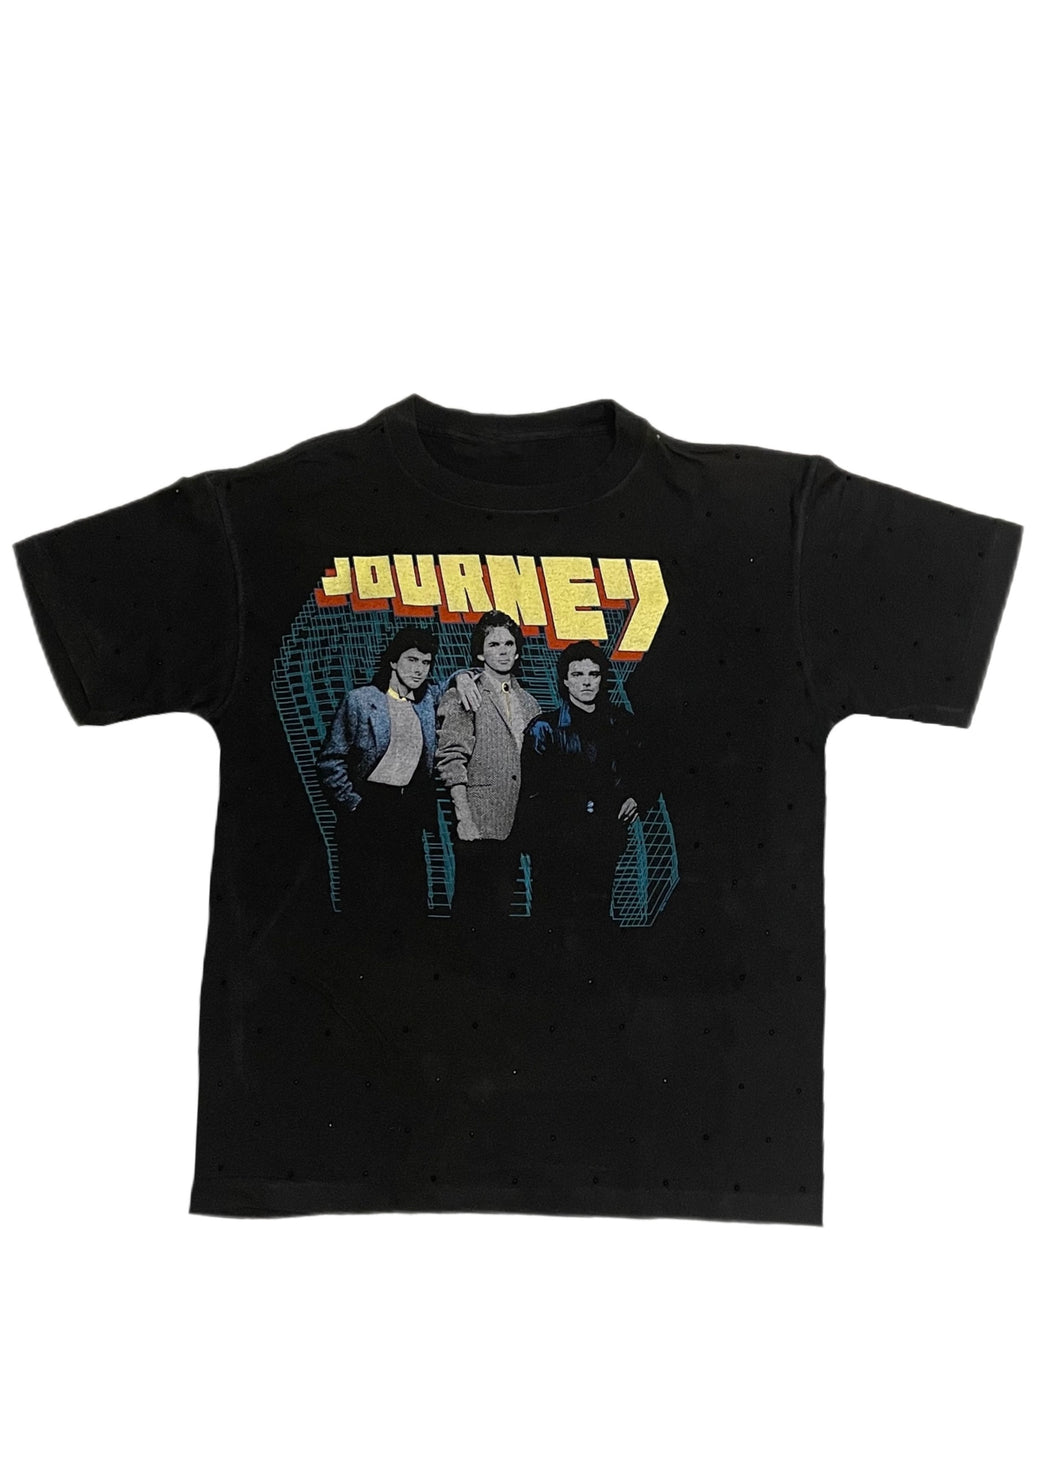 Journey, One of a KIND “Rare Find” Vintage Rock Band Tee with Overall Black Crystal Design